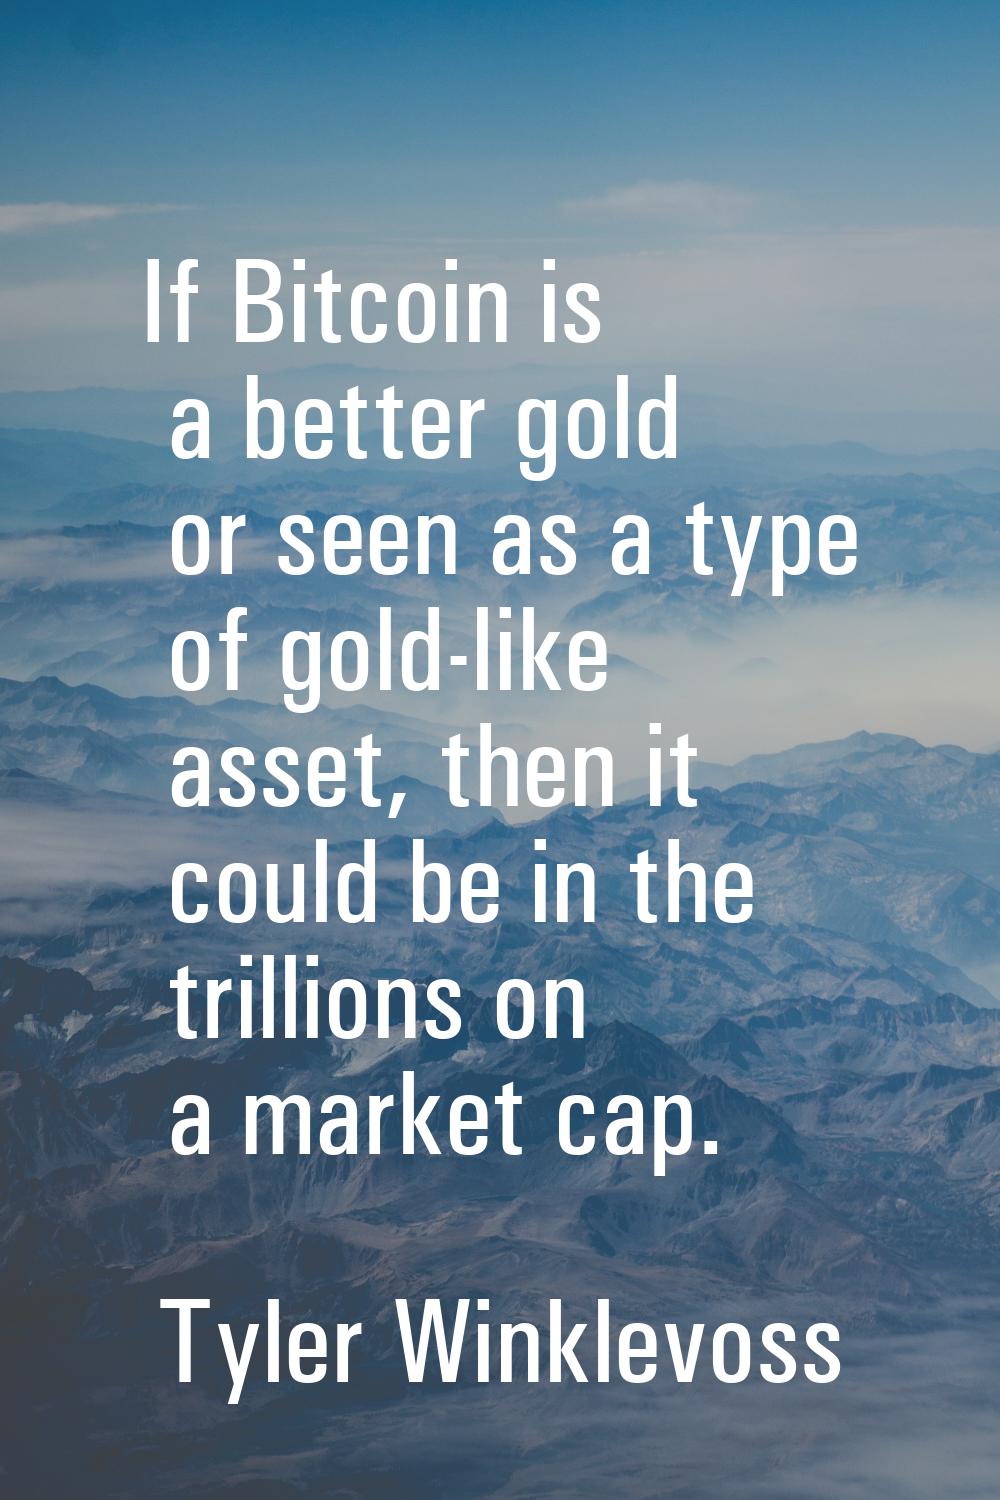 If Bitcoin is a better gold or seen as a type of gold-like asset, then it could be in the trillions